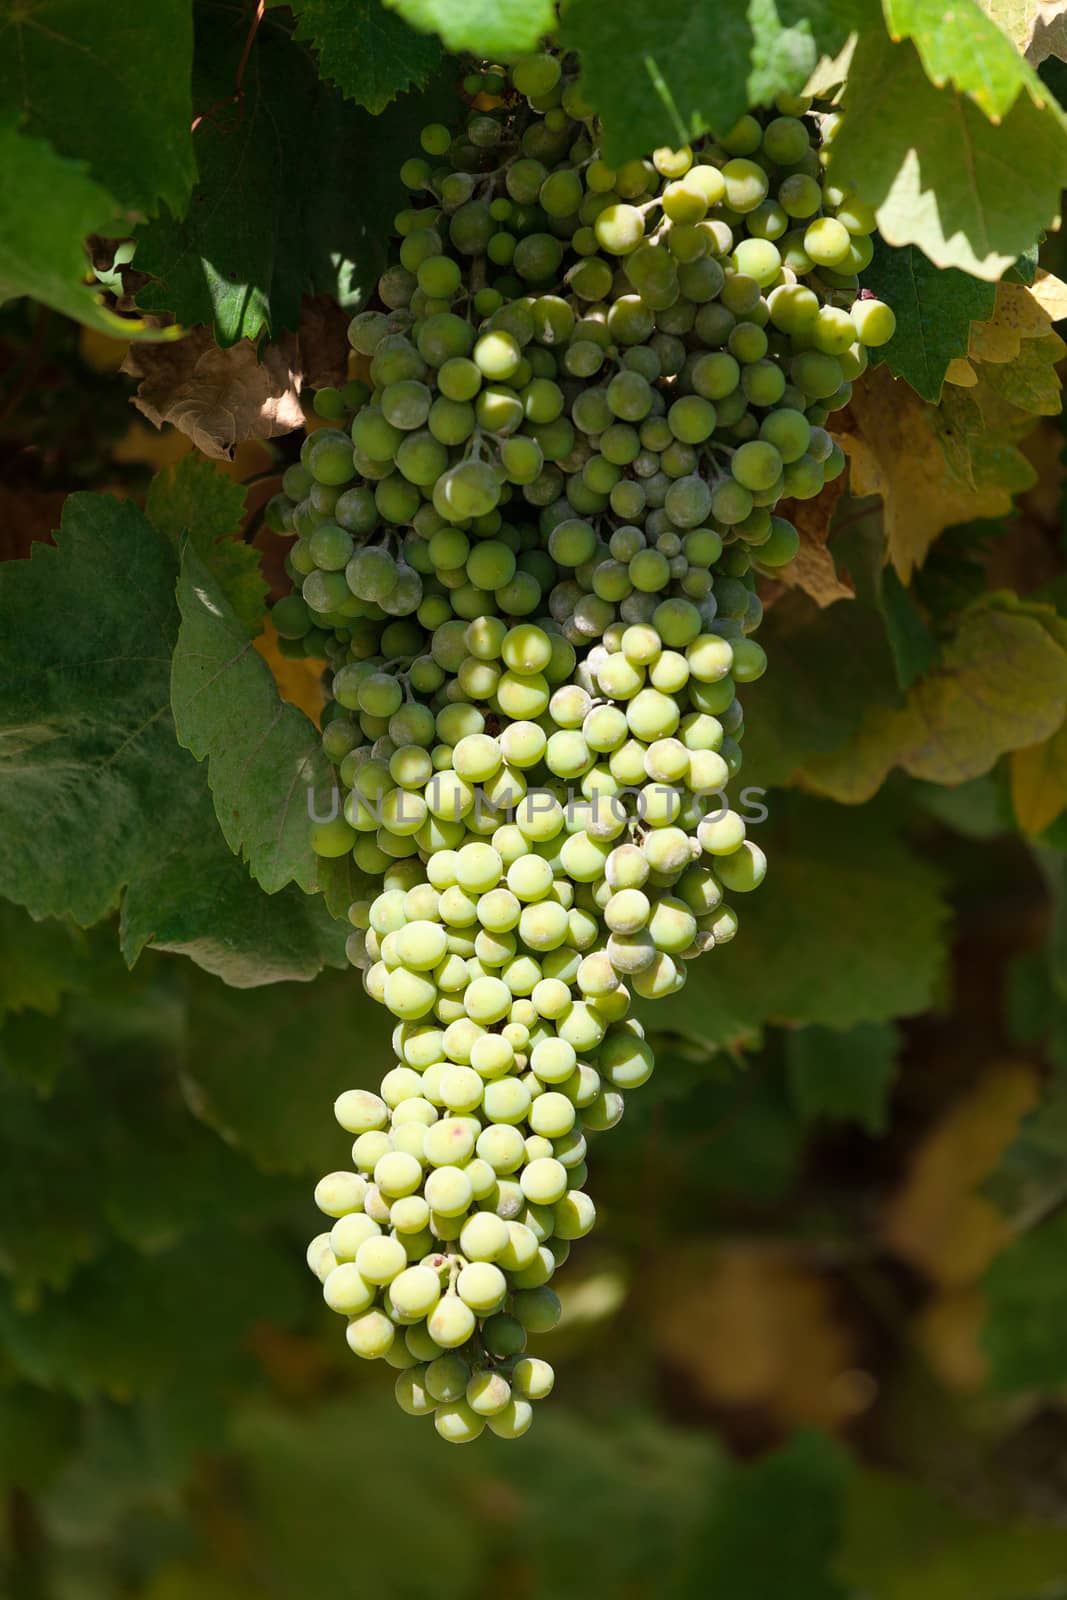 Bunch of green grapes on grapevine in vineyard by Discovod